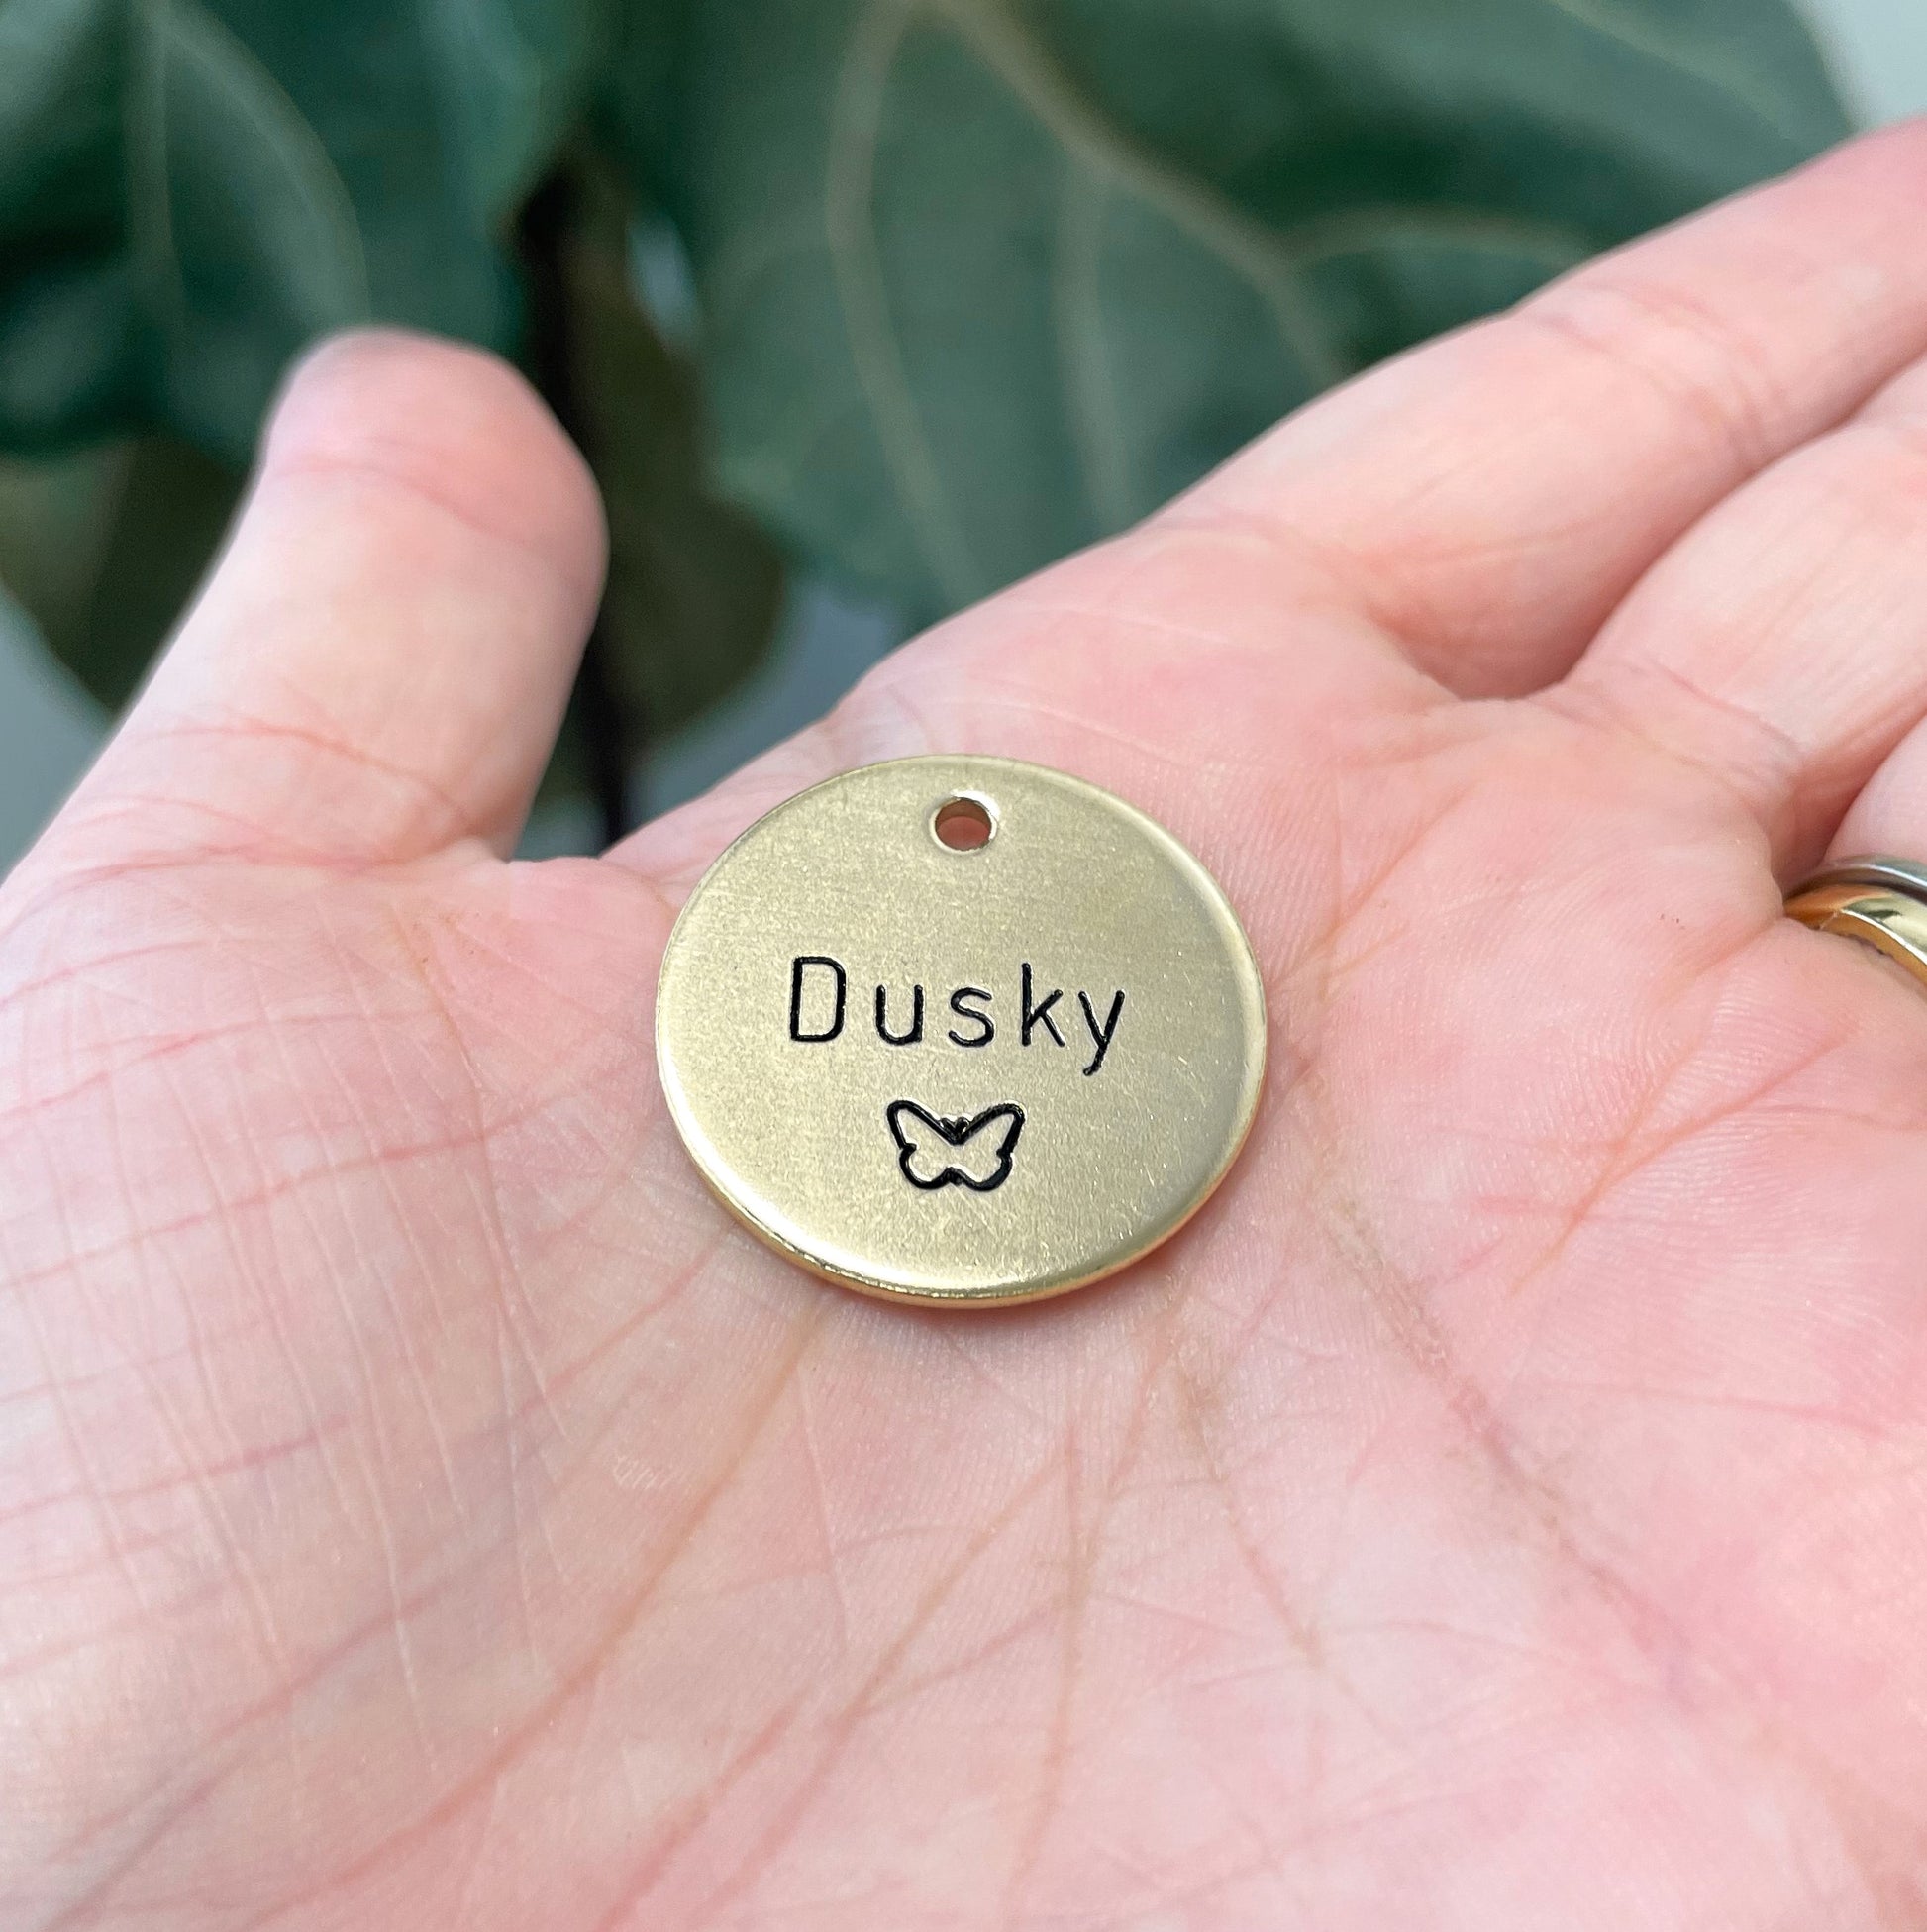 Personalized Dog Tag - Butterfly Design Engraved Dog Tag - Butterfly Hand Design Tag - Cat ID Tag - Dog Collar Tag - Custom Dog Tag - Personalized Tag - Pet ID Tag - Pet Name Tag - Nature Themed Dog Tag 